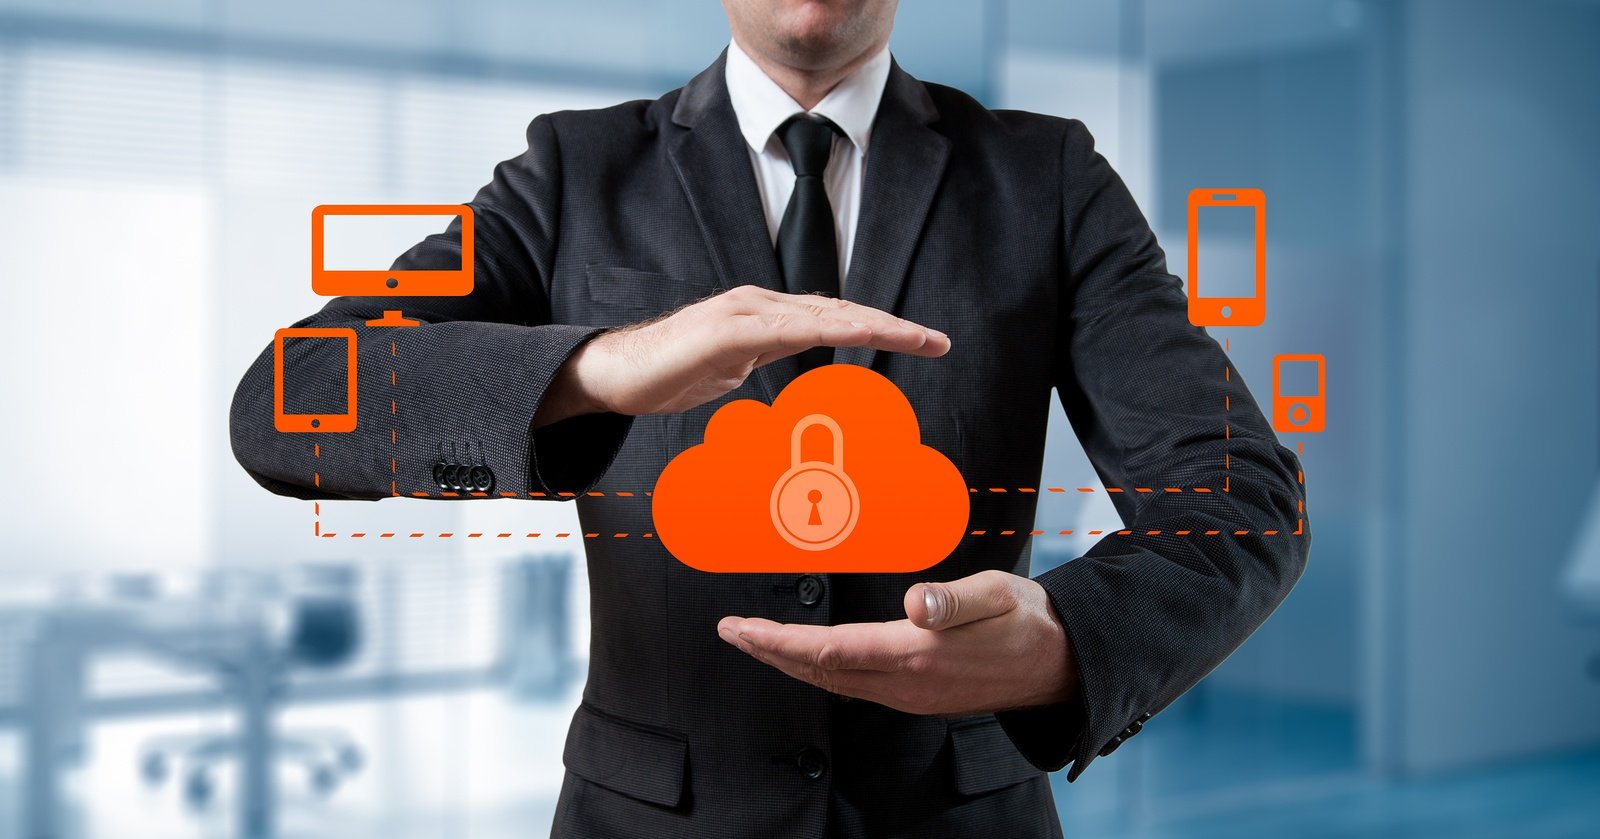 Azure Security Center, can your data be more secure in the cloud?